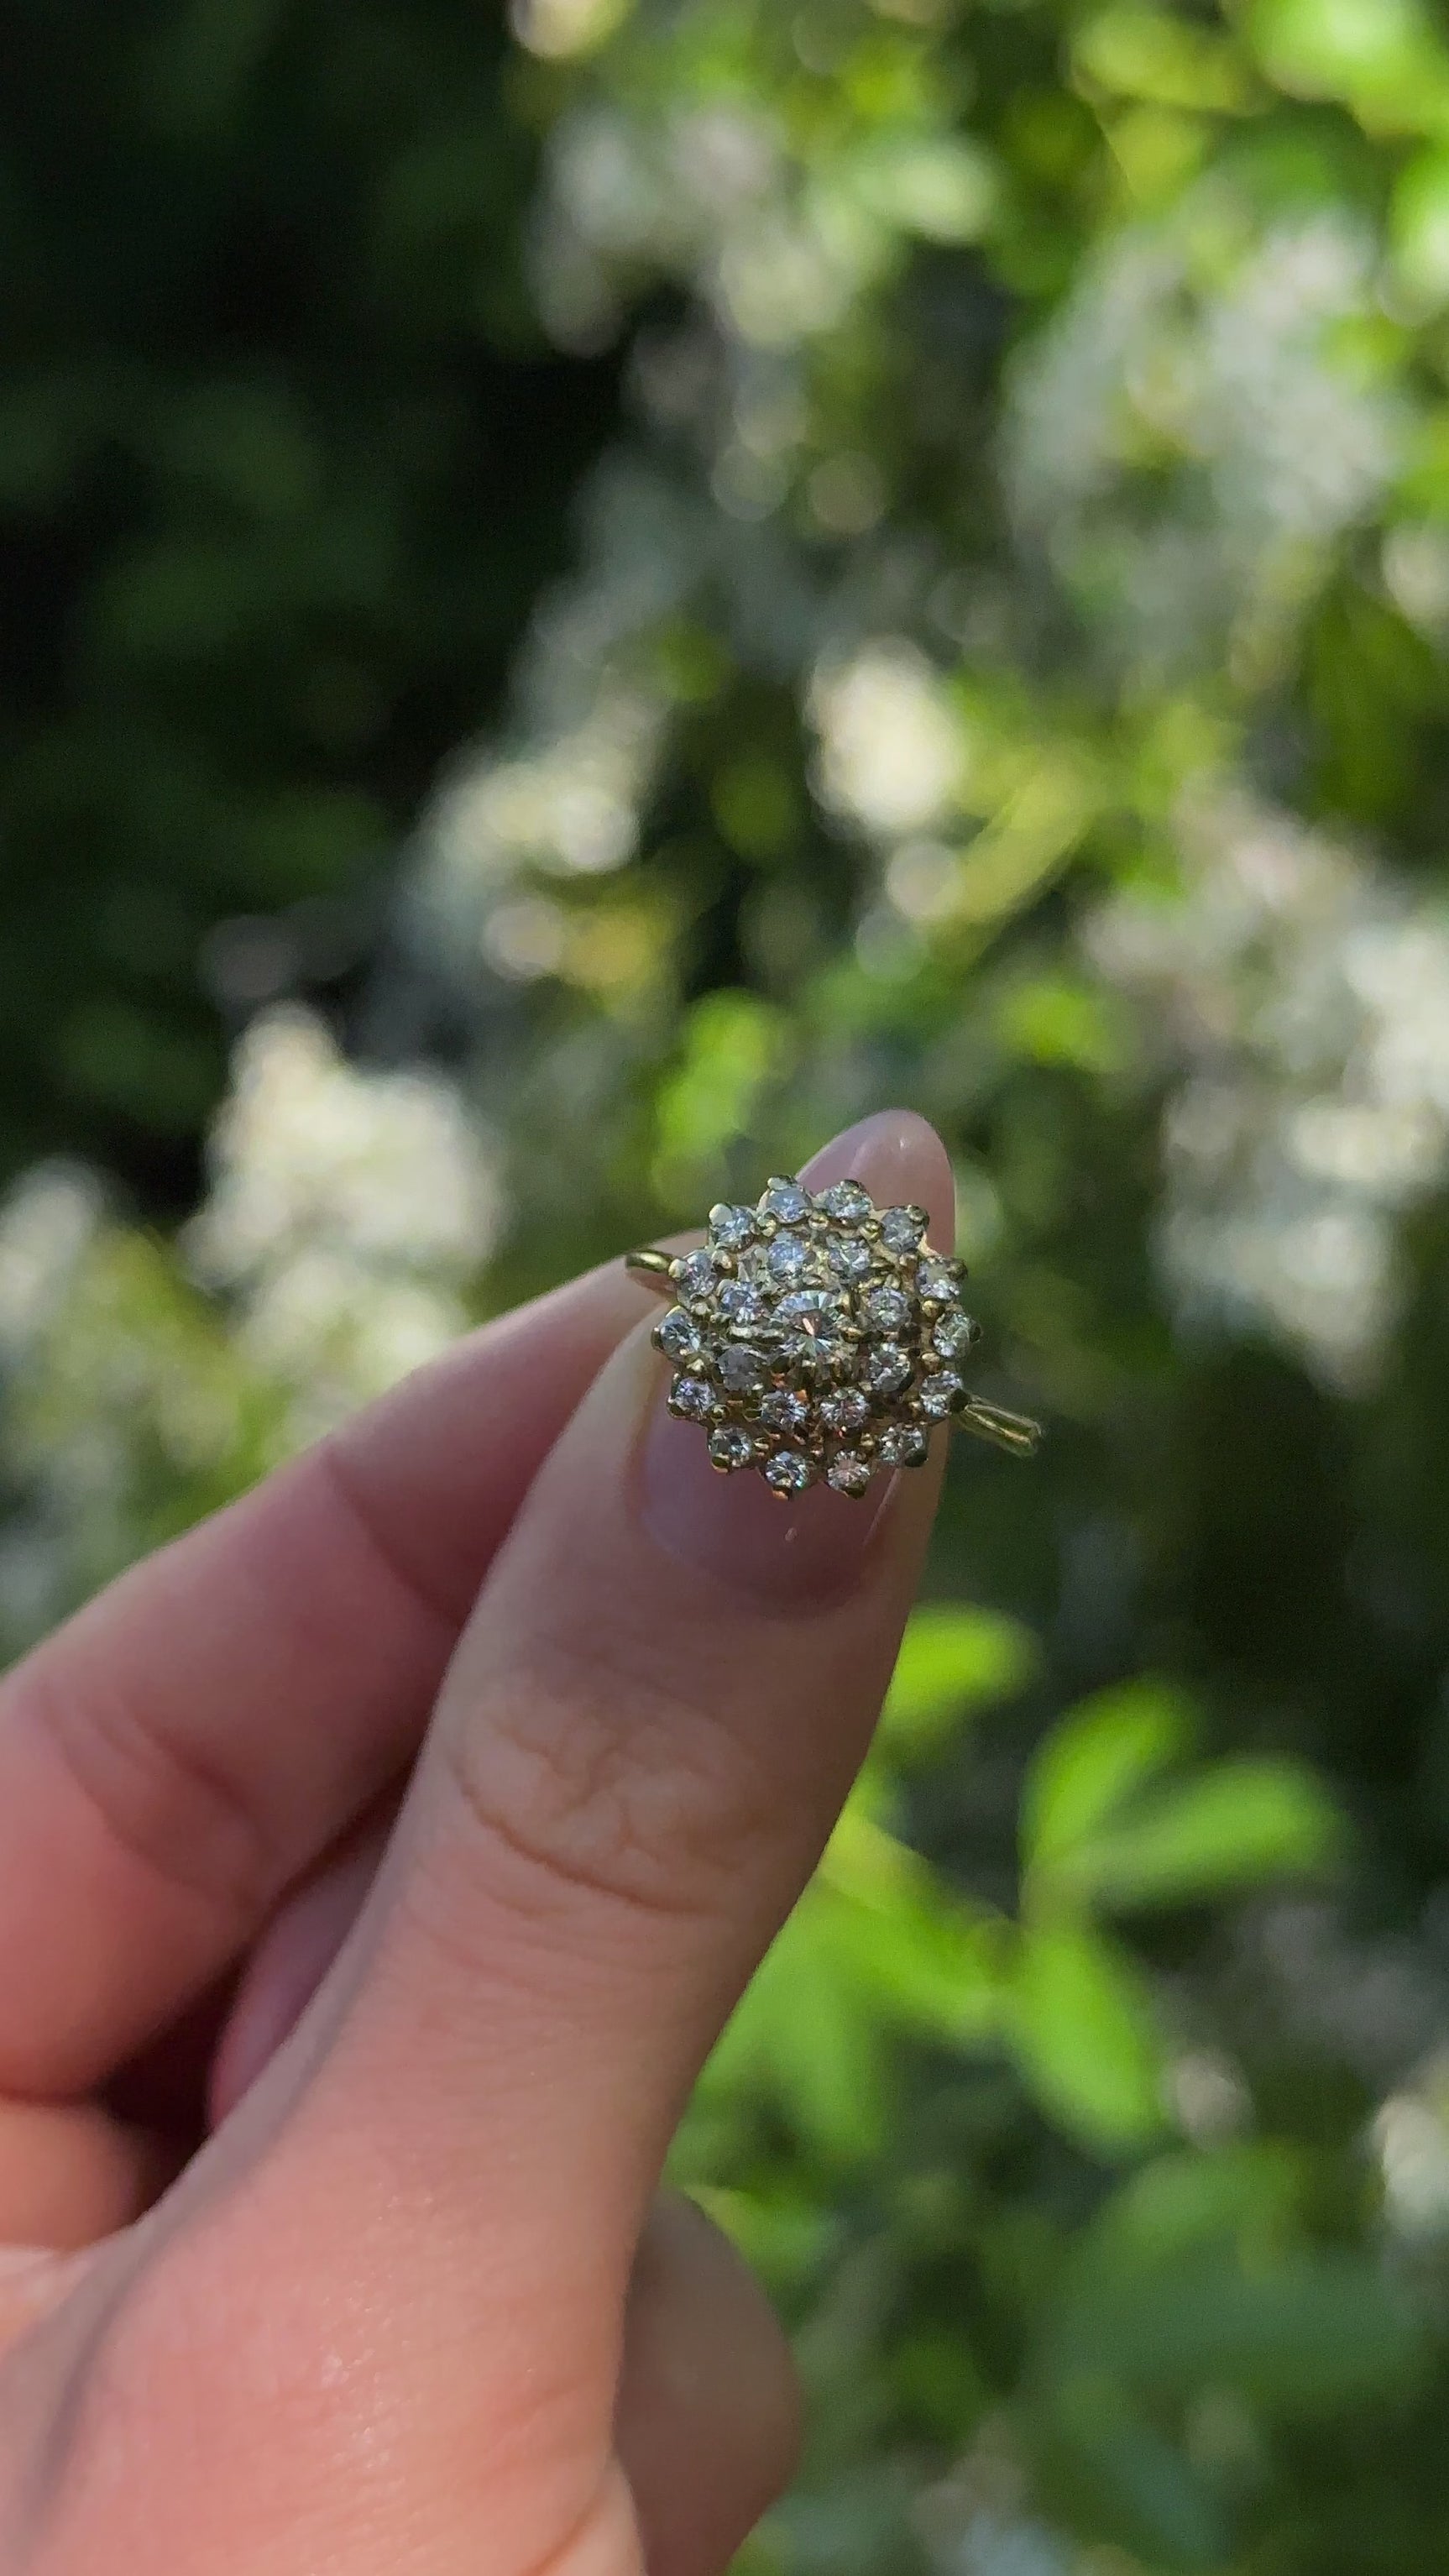 Vintage, 1970s Large Diamond Cluster Ring, 18ct Yellow Gold held in fingers and rotated to give perspective.